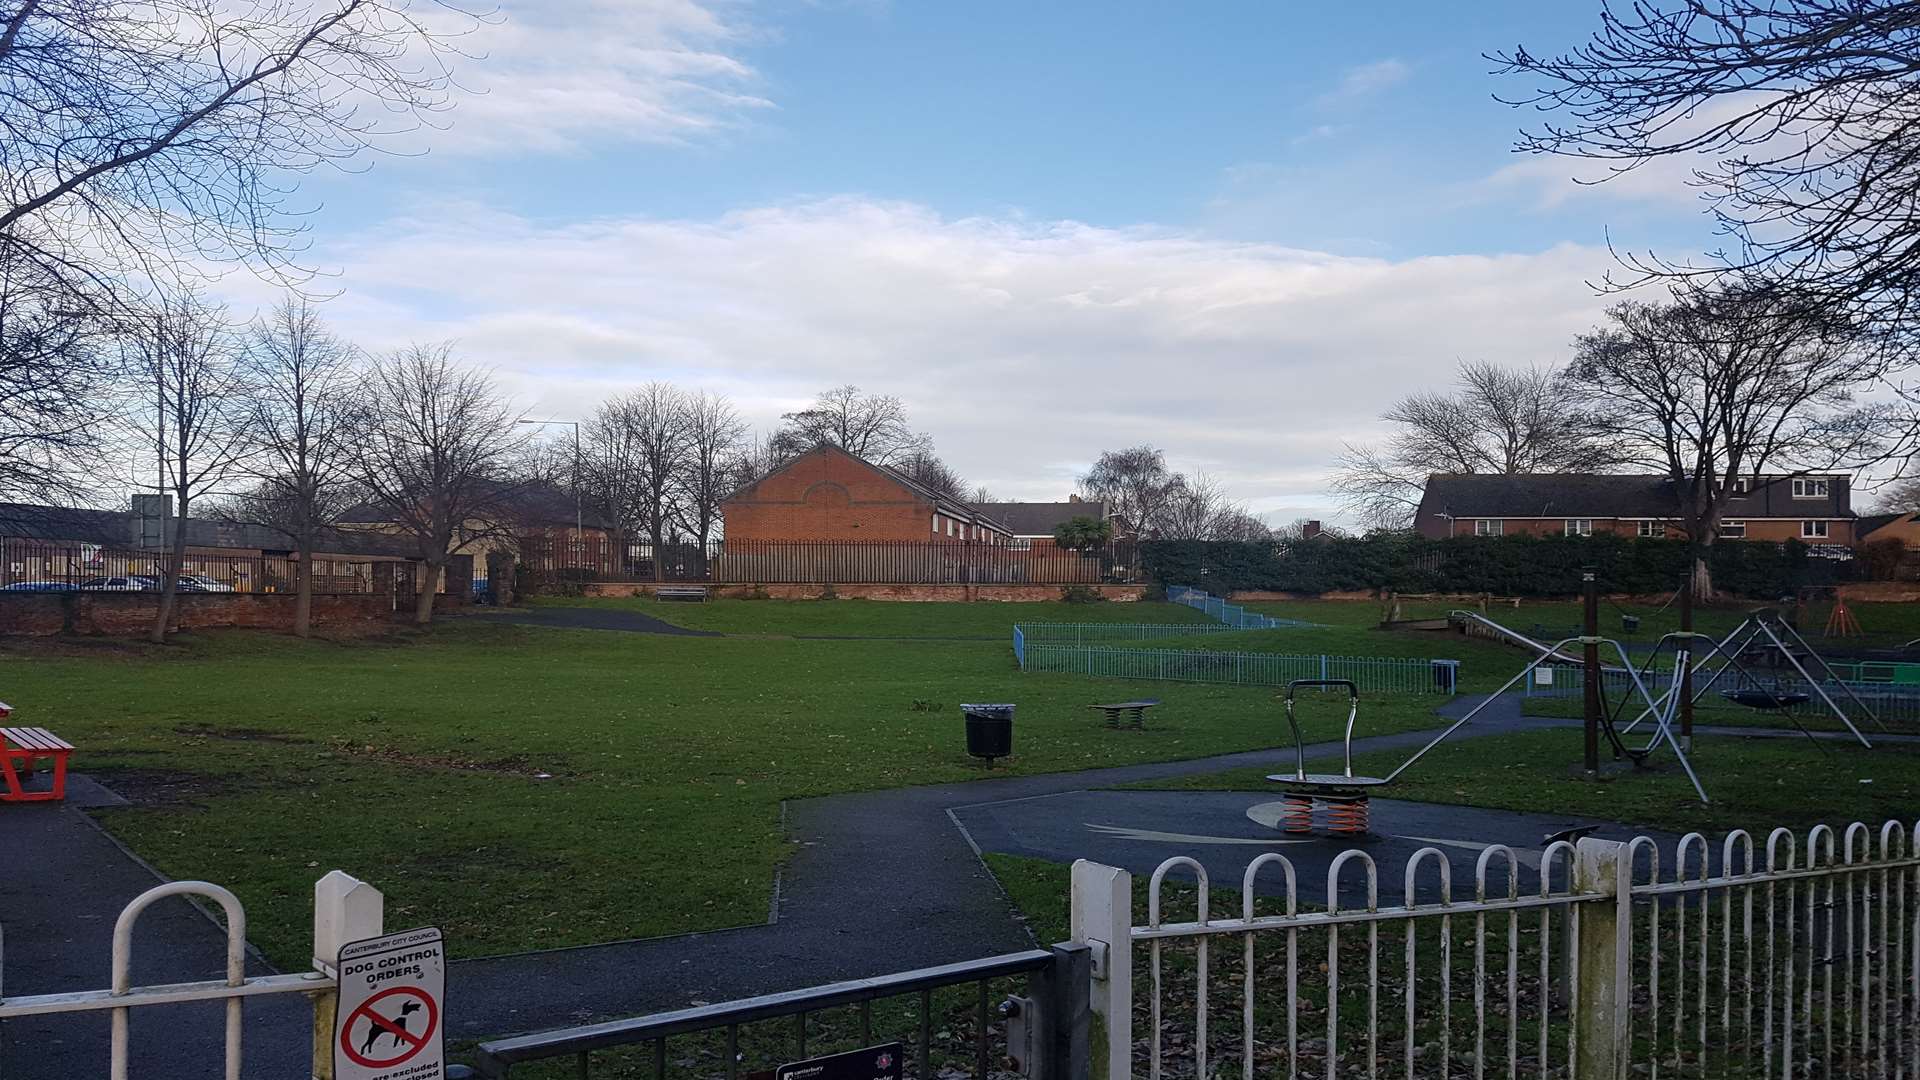 A man was reportedly subjected to a sex attack in a children’s play park